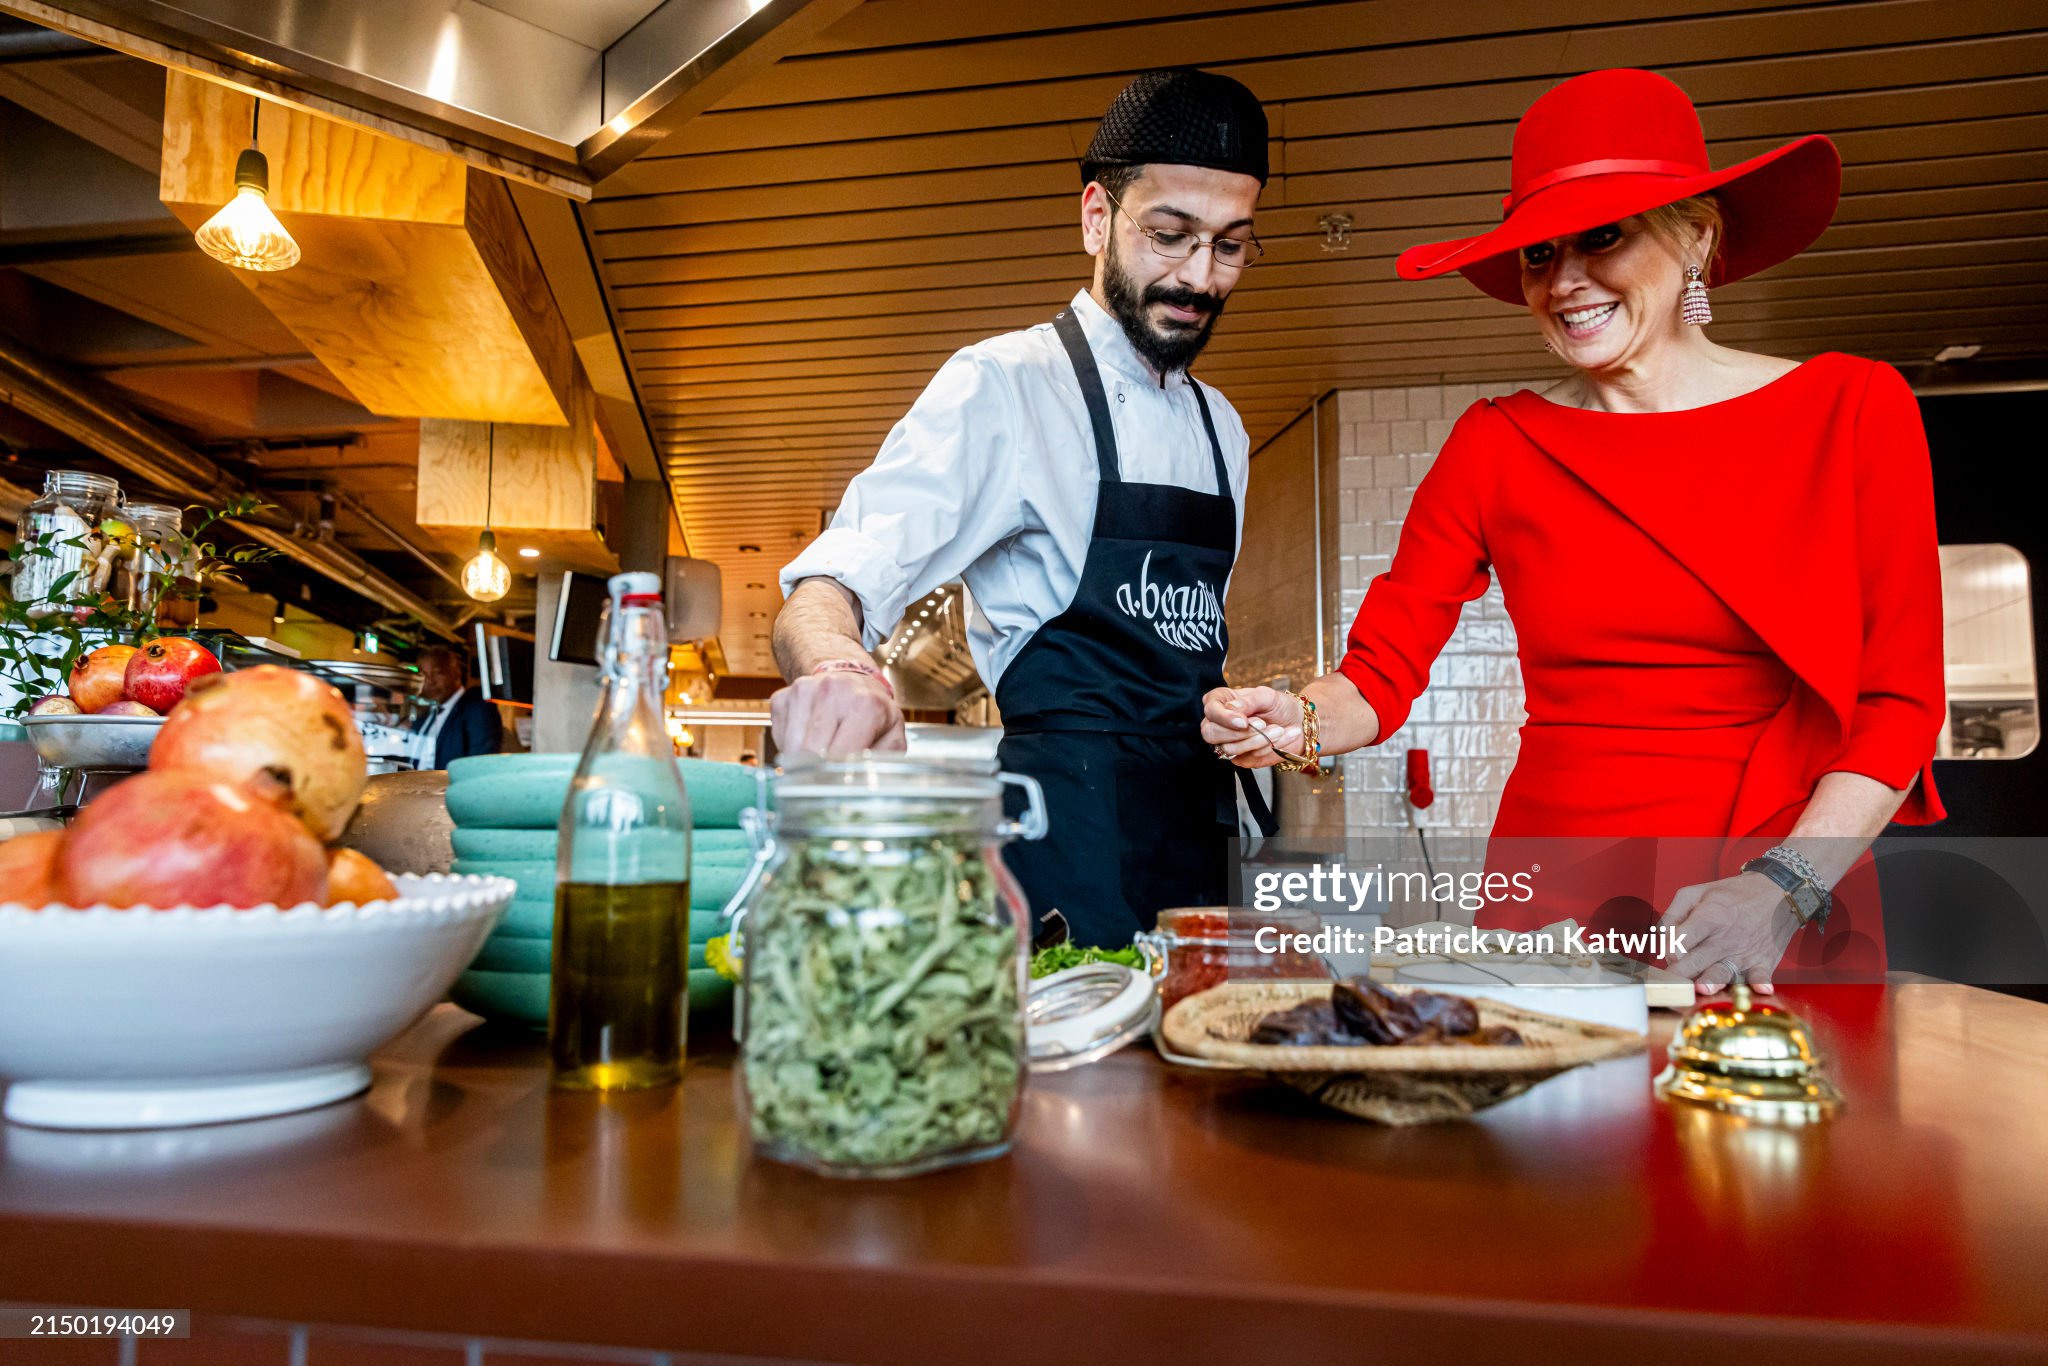 queen-maxima-of-the-netherlands-visits-a-beautifull-mess-refugee-project-in-amsterdam.jpg?s=2048x2048&w=gi&k=20&c=pwCKfsfV1utZitKMVnENk6PxyrgUxJ2rNUEZ4WBYKkw=